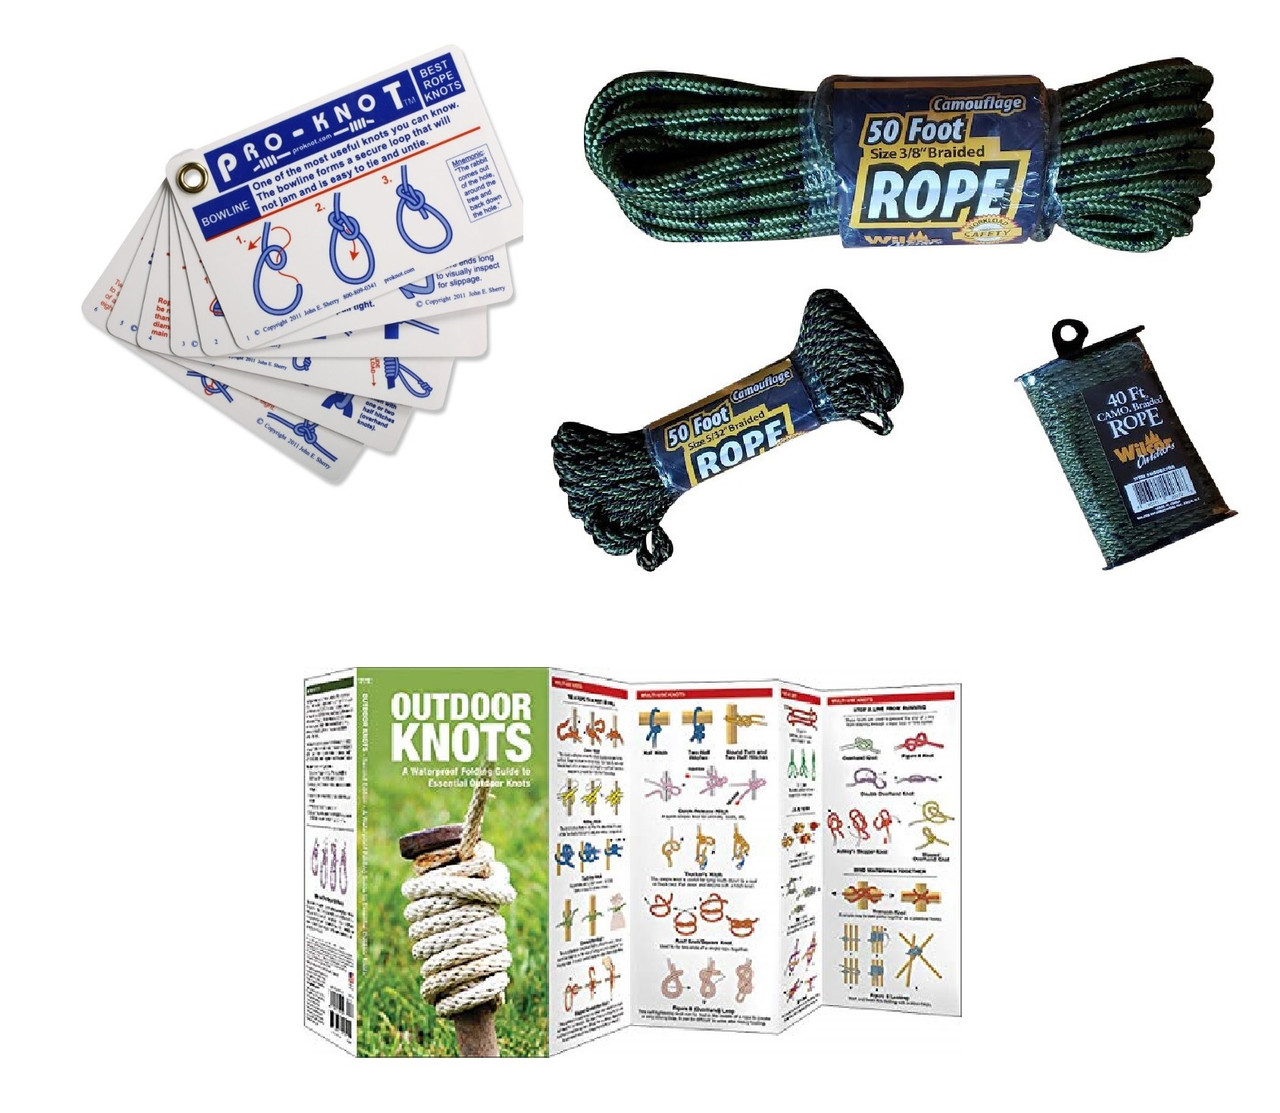 Knot Tying Kit Deluxe with 140 Feet of Camo Rope in Variety of Sizes